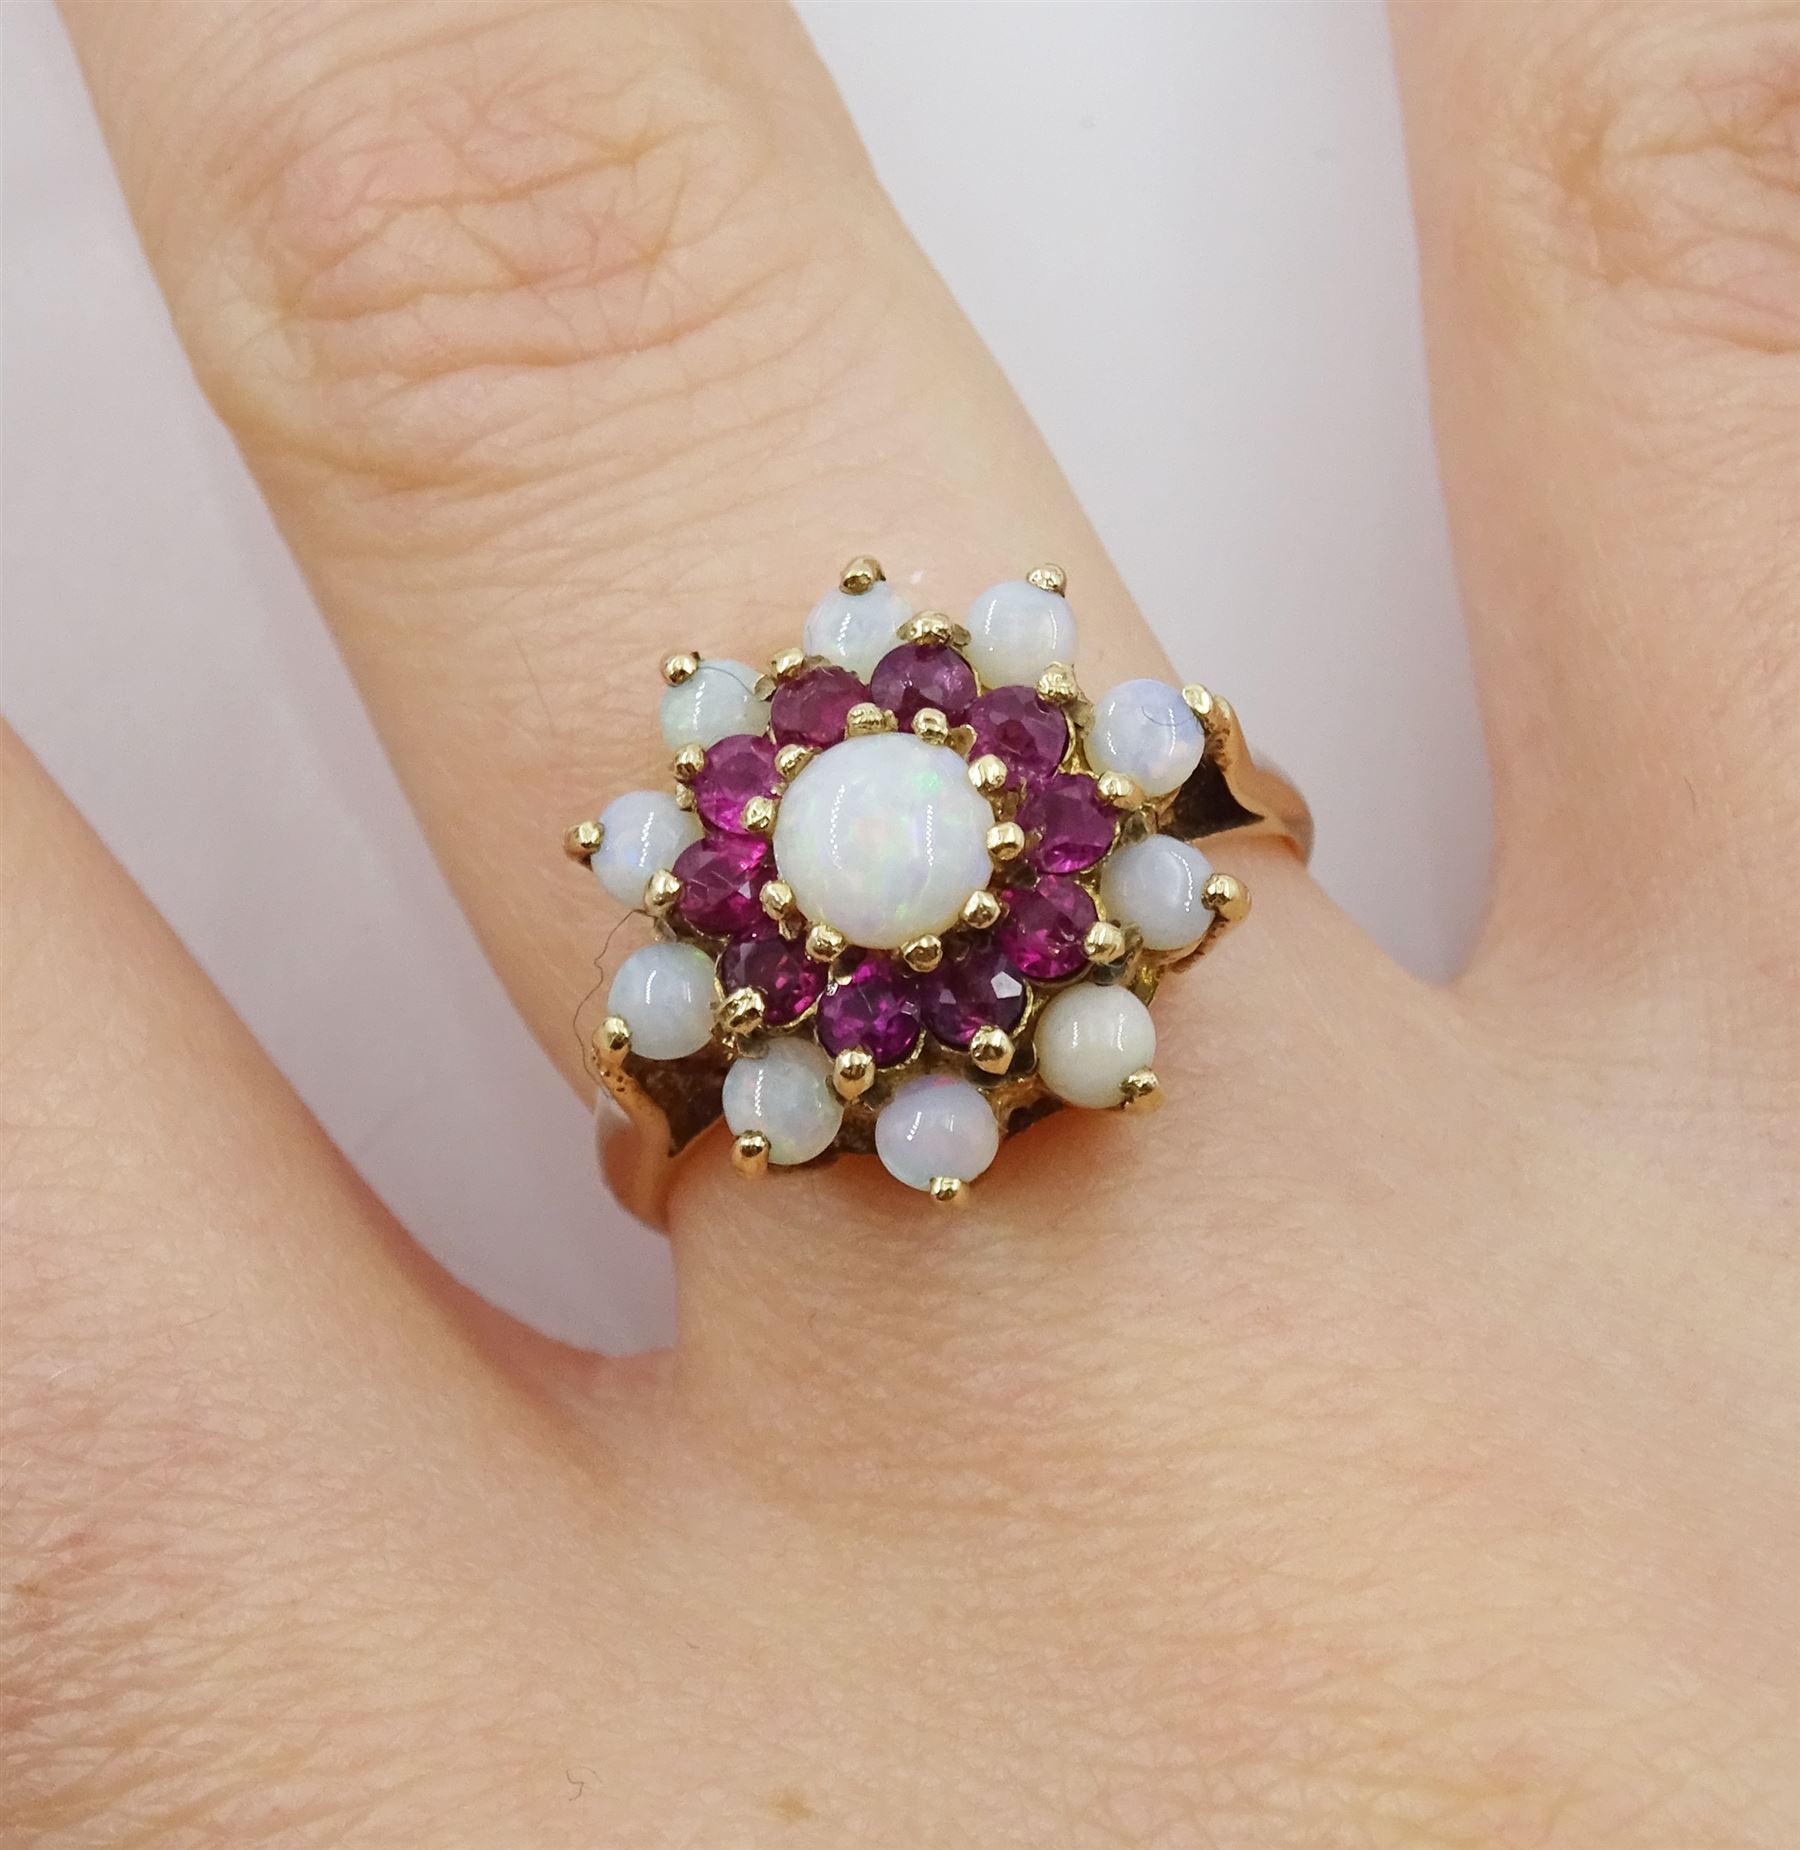 9ct gold opal and ruby cluster ring - Image 2 of 4